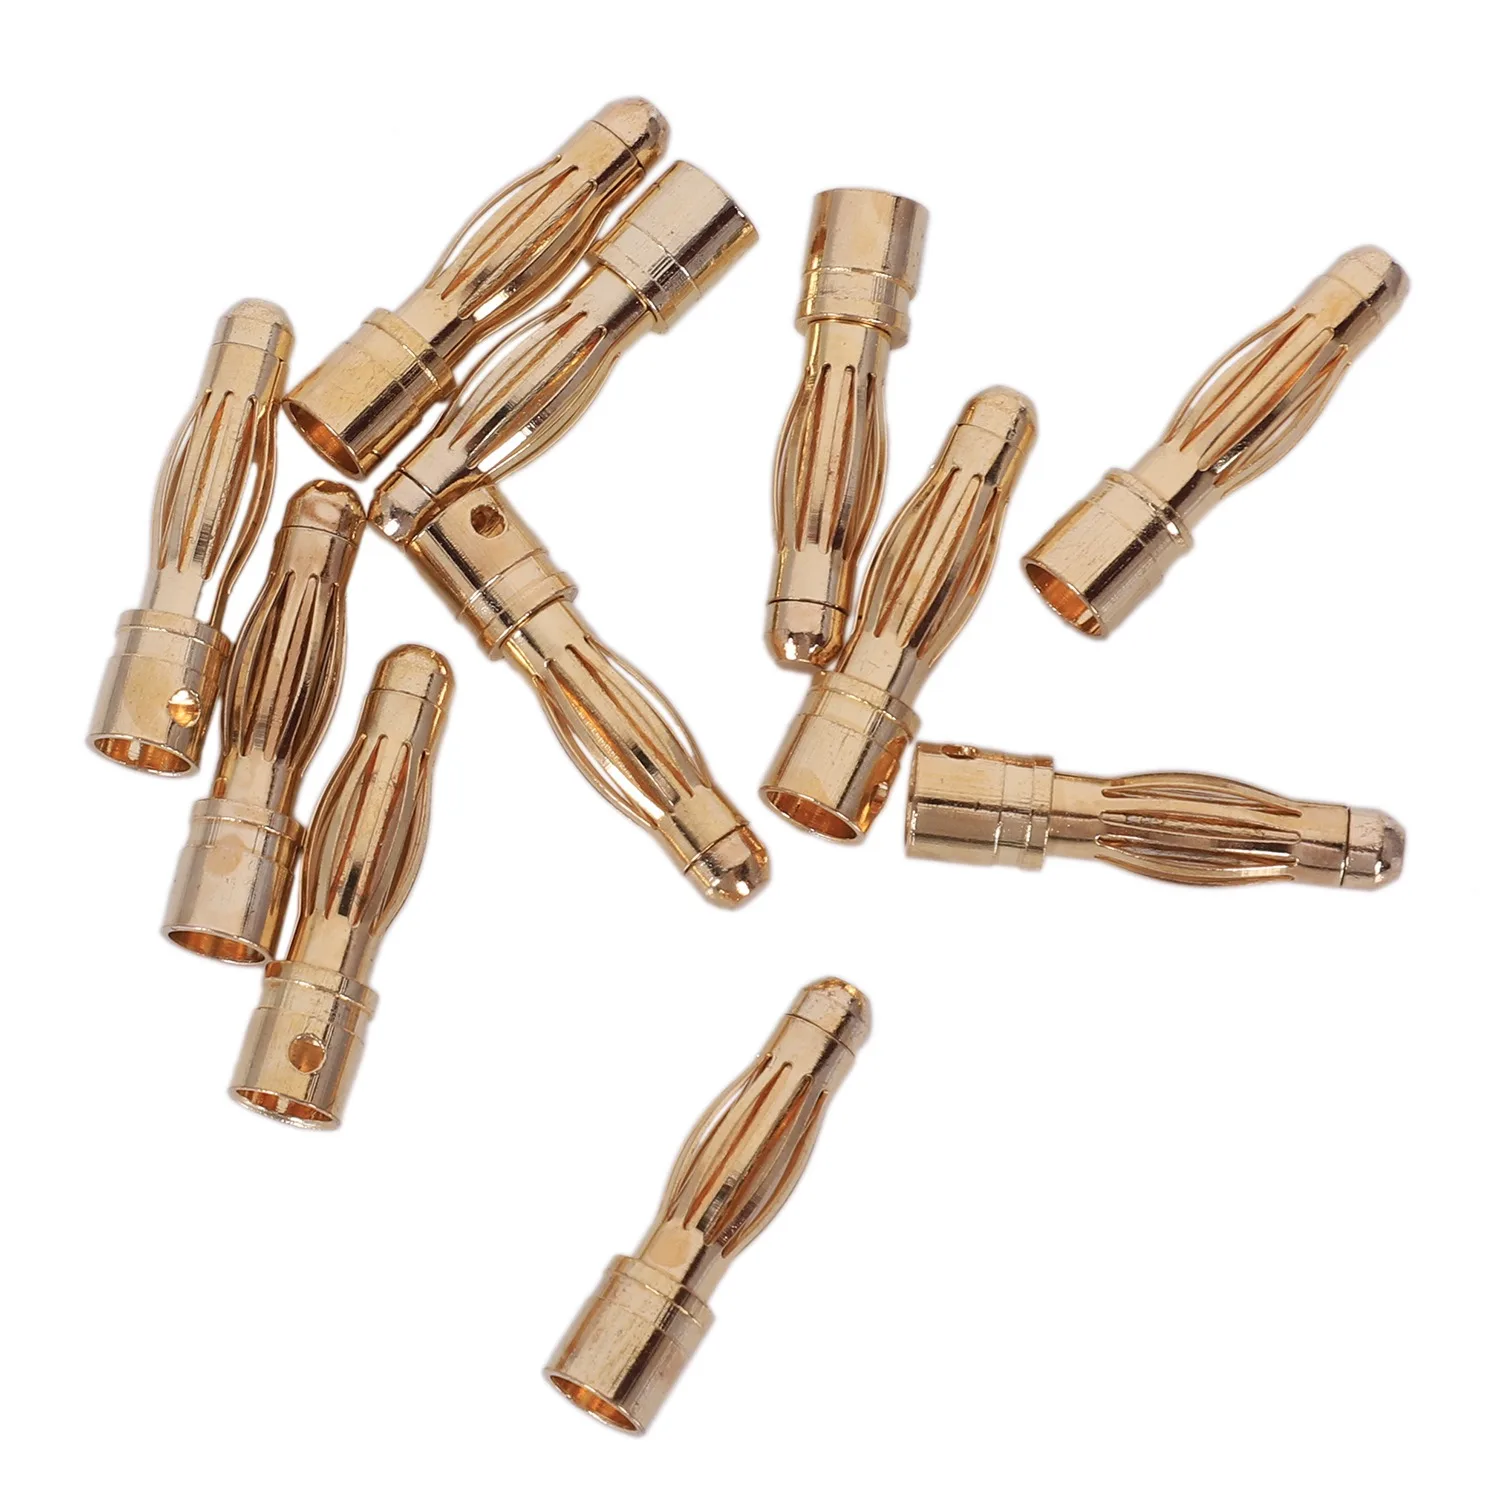 

10PCS Gold Tone 4mm Male Banana Plug Bullet Connector Replacements